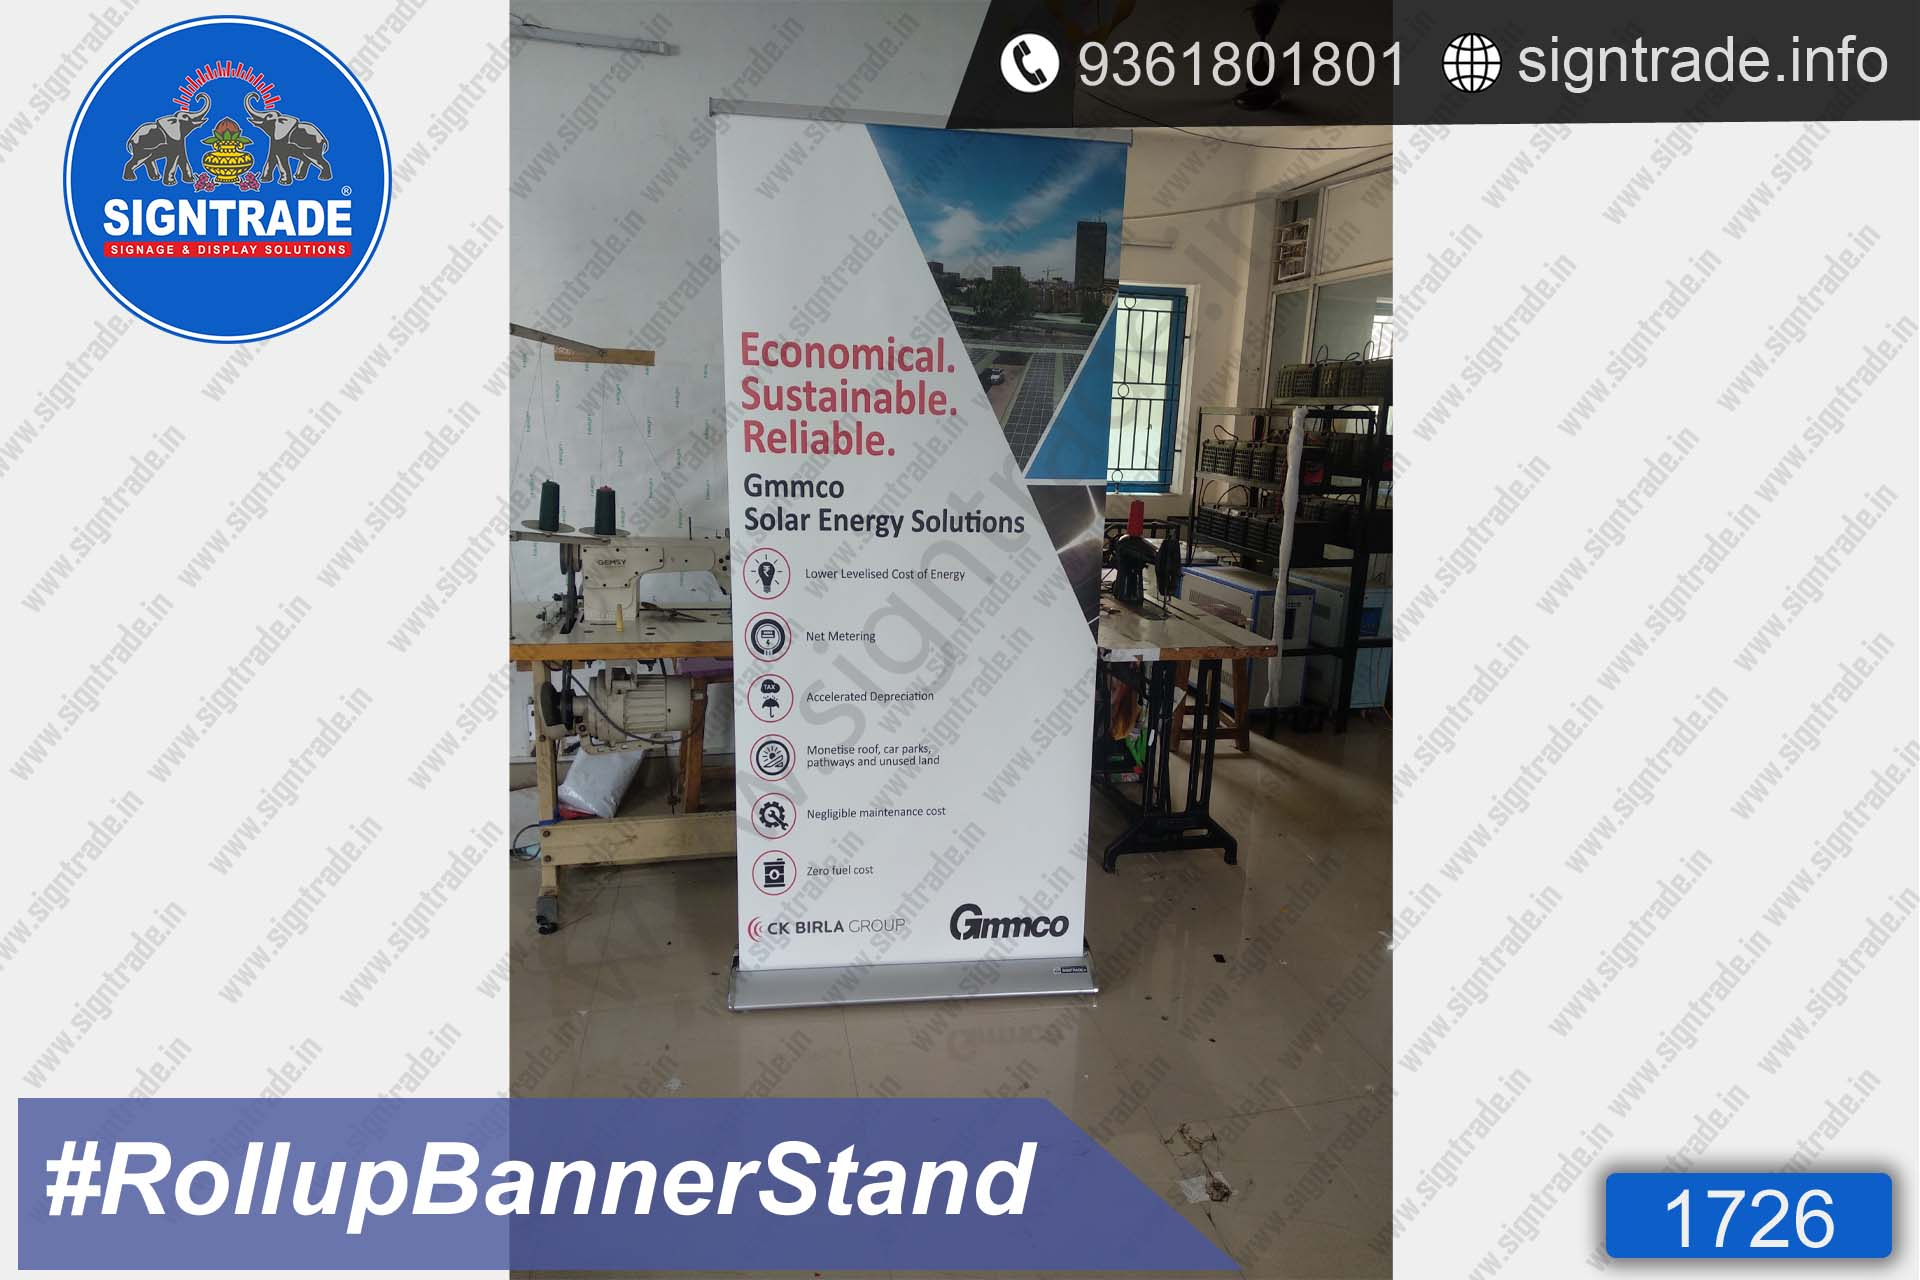 gmmco solar energy solutions rollup banner standee